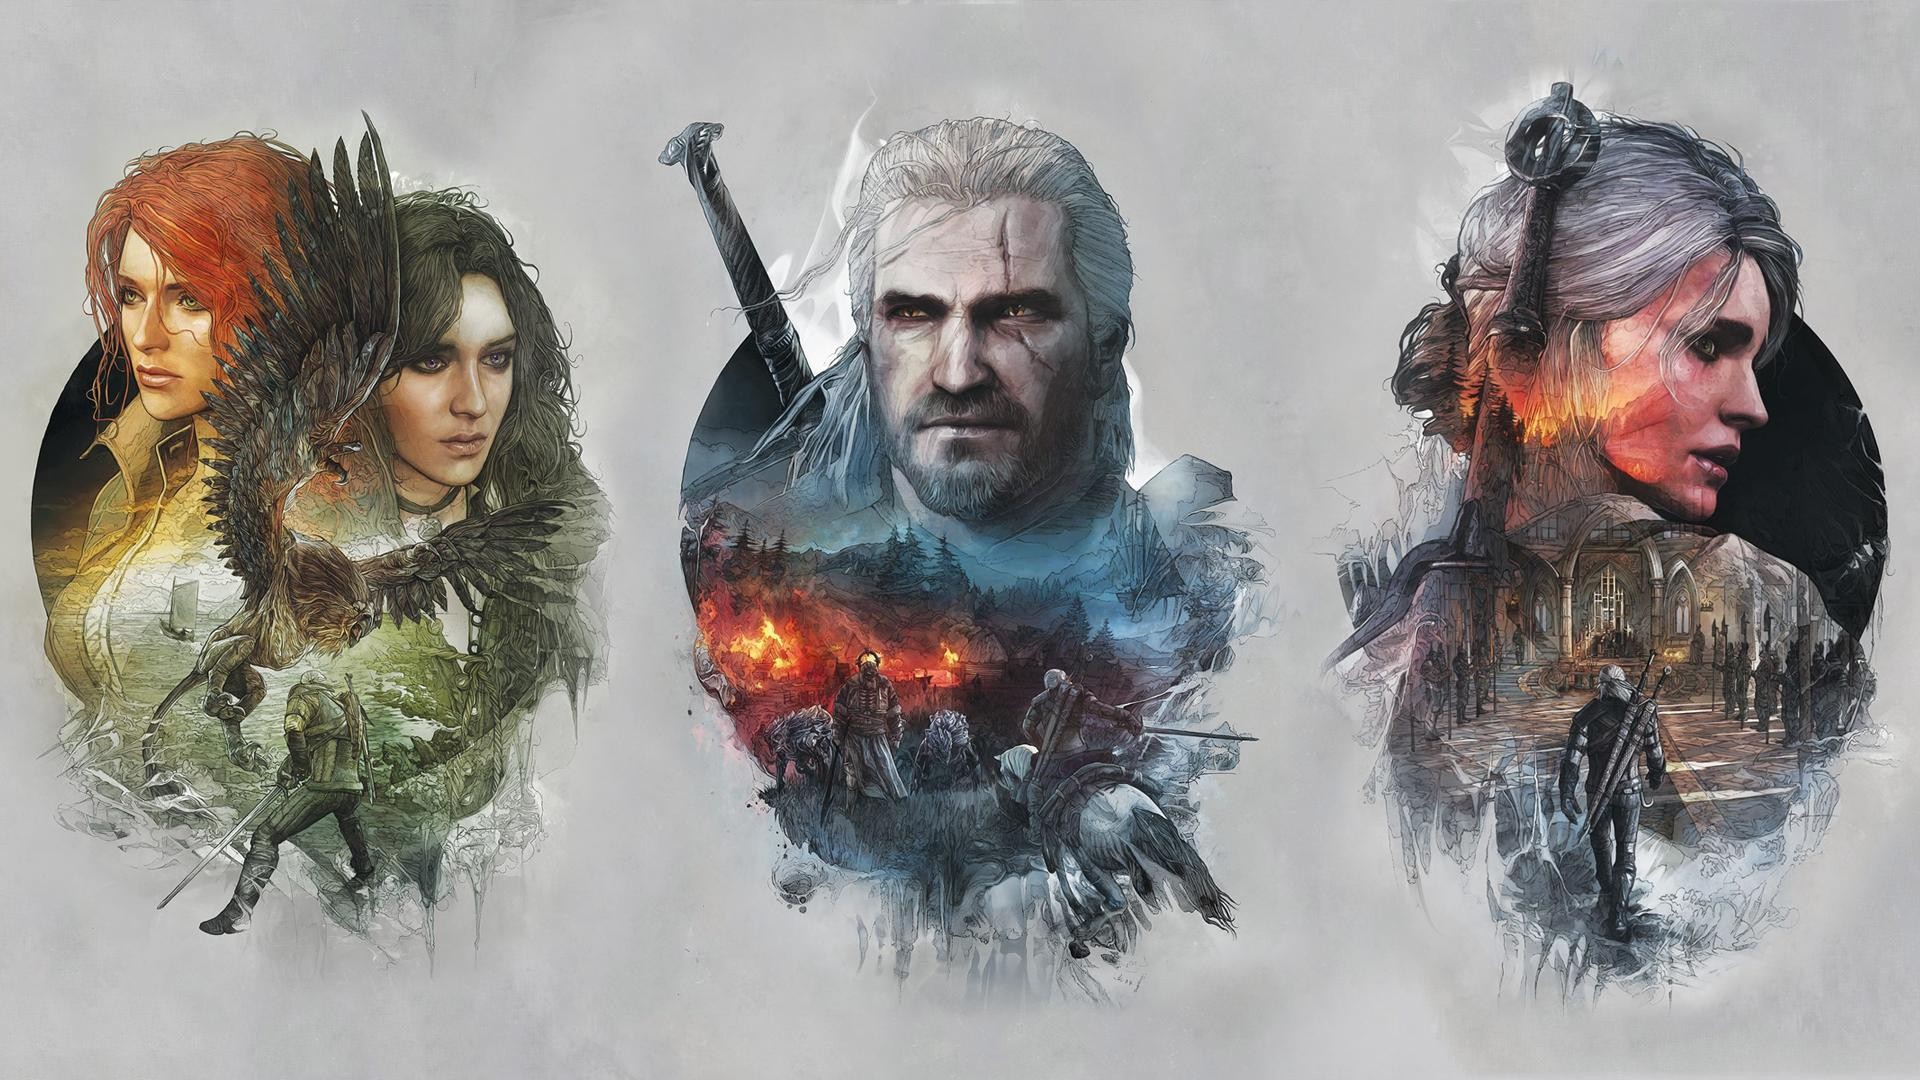 General 1920x1080 The Witcher Geralt of Rivia The Witcher 3: Wild Hunt video games simple background gray background fantasy art fantasy girl video game man video game characters video game girls PC gaming RPG Cirilla Fiona Elen Riannon